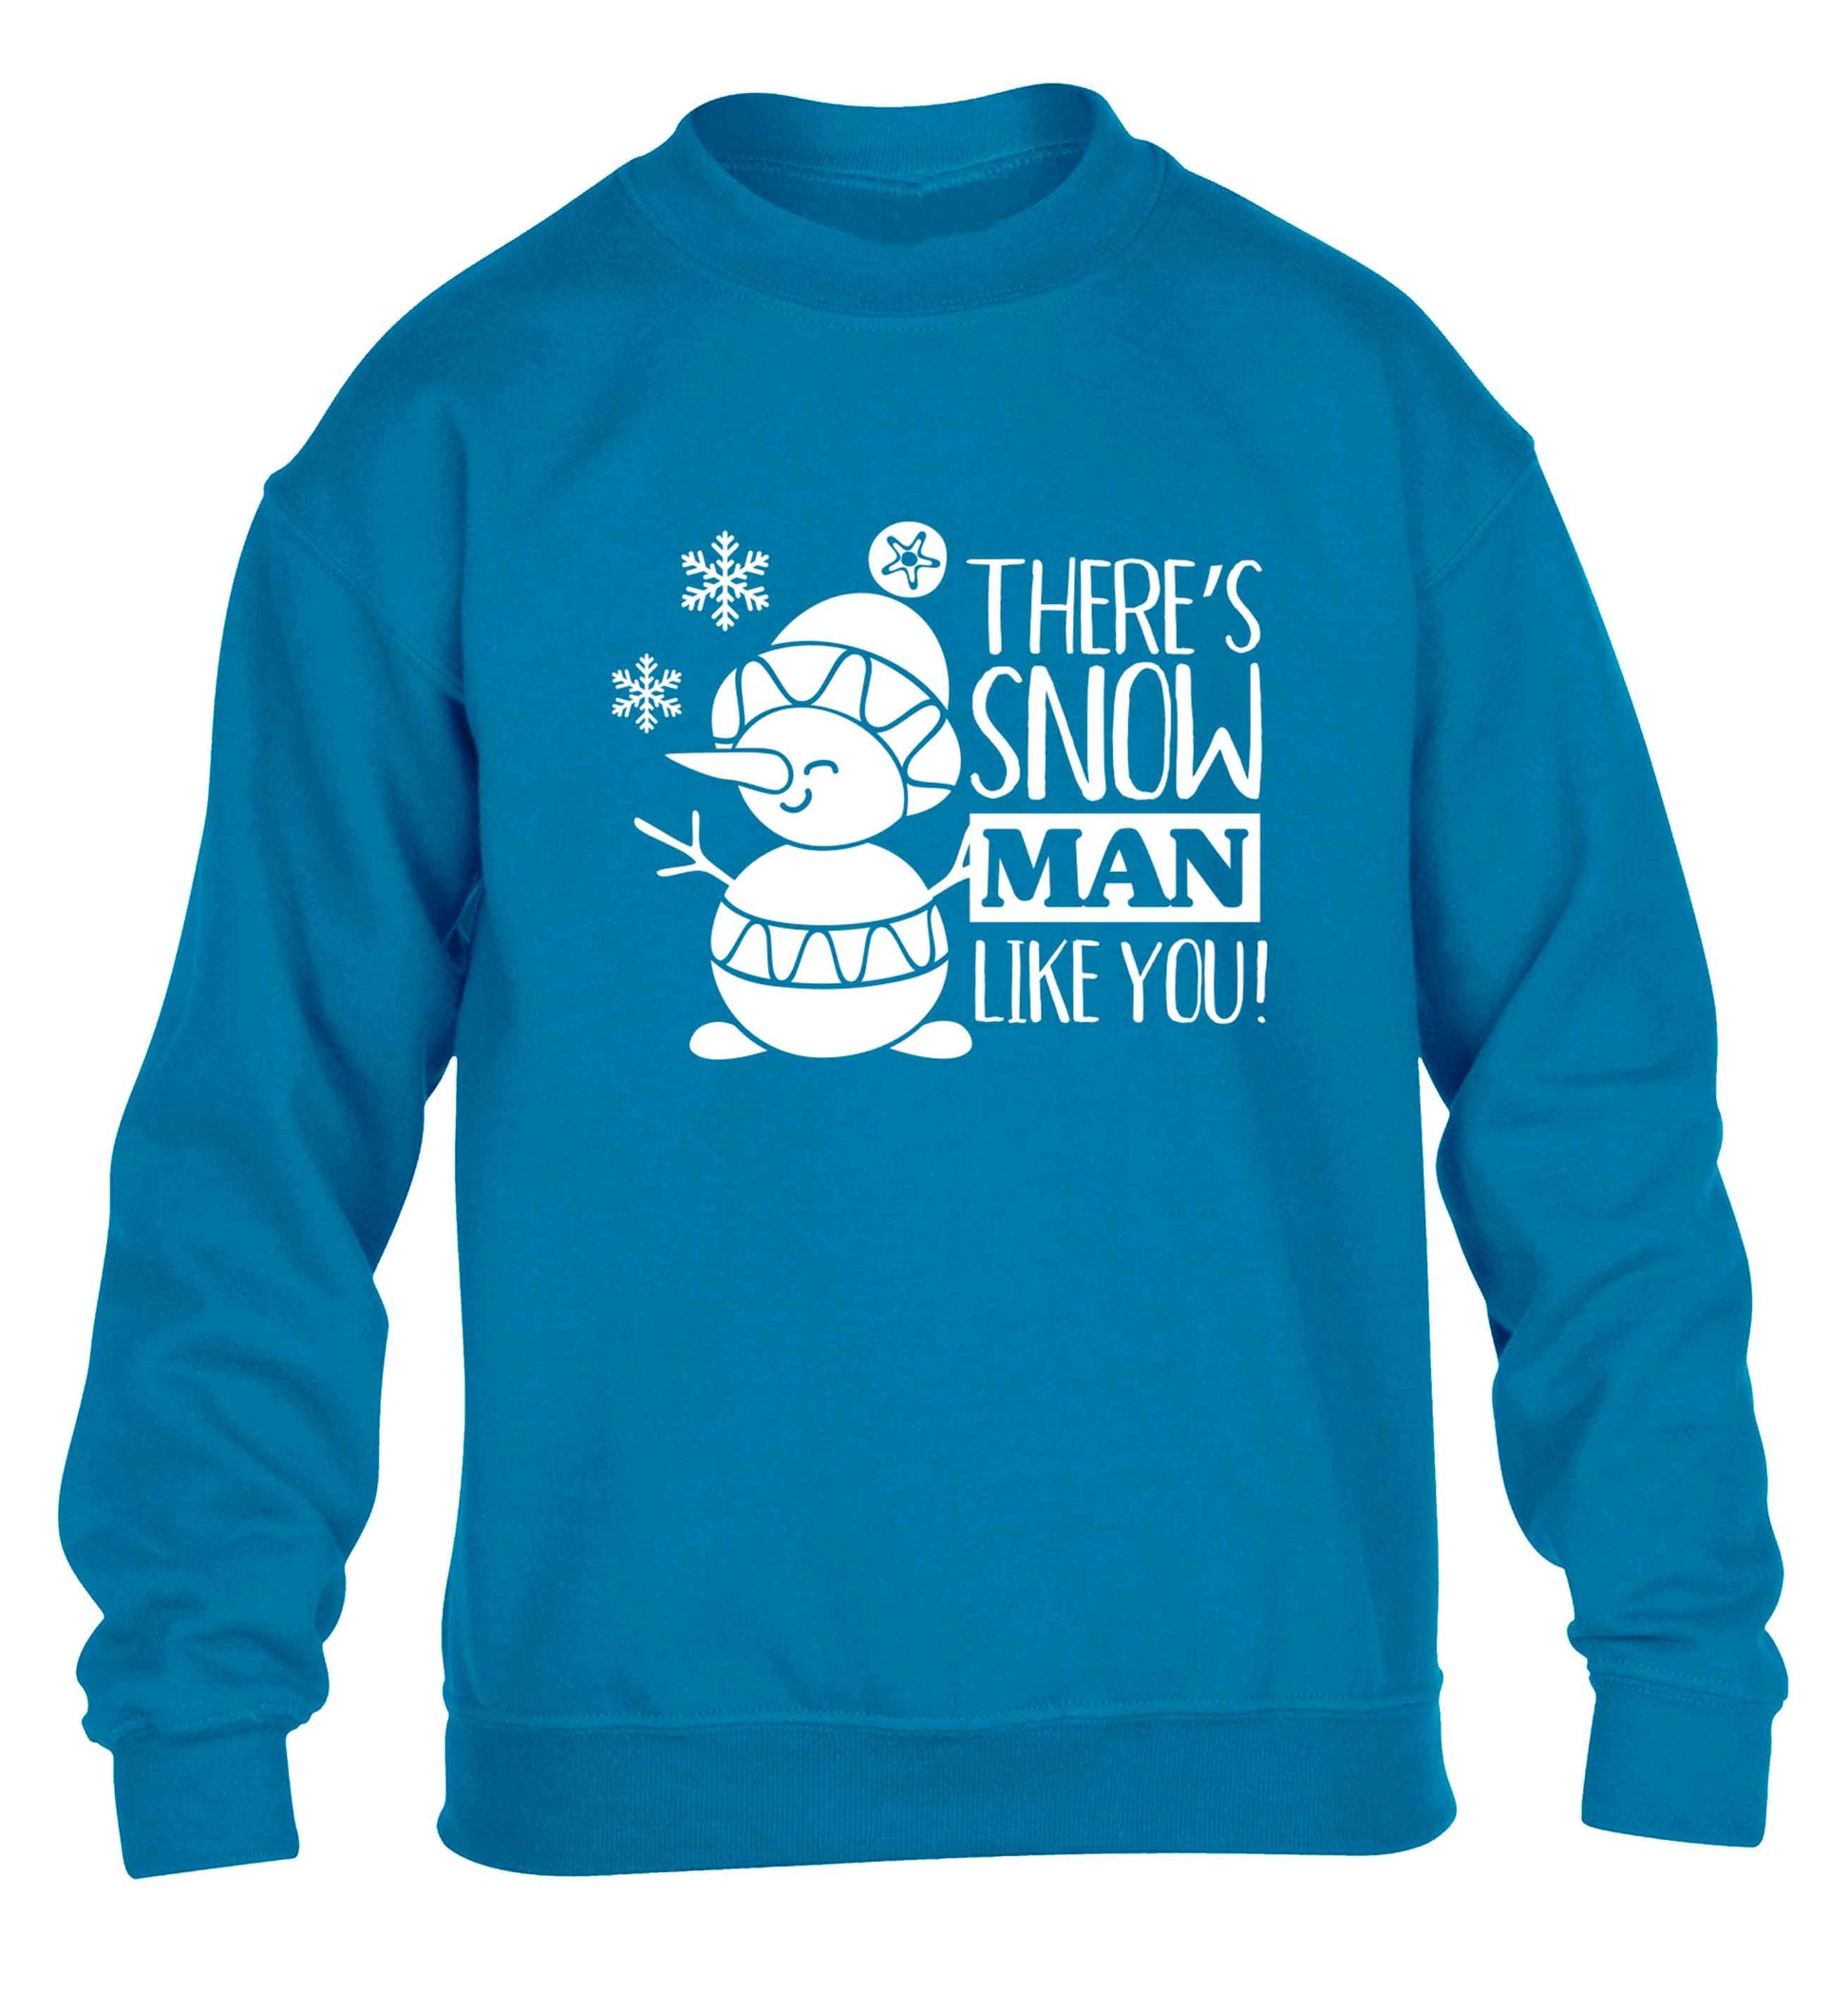 There's snow man like you children's blue sweater 12-13 Years